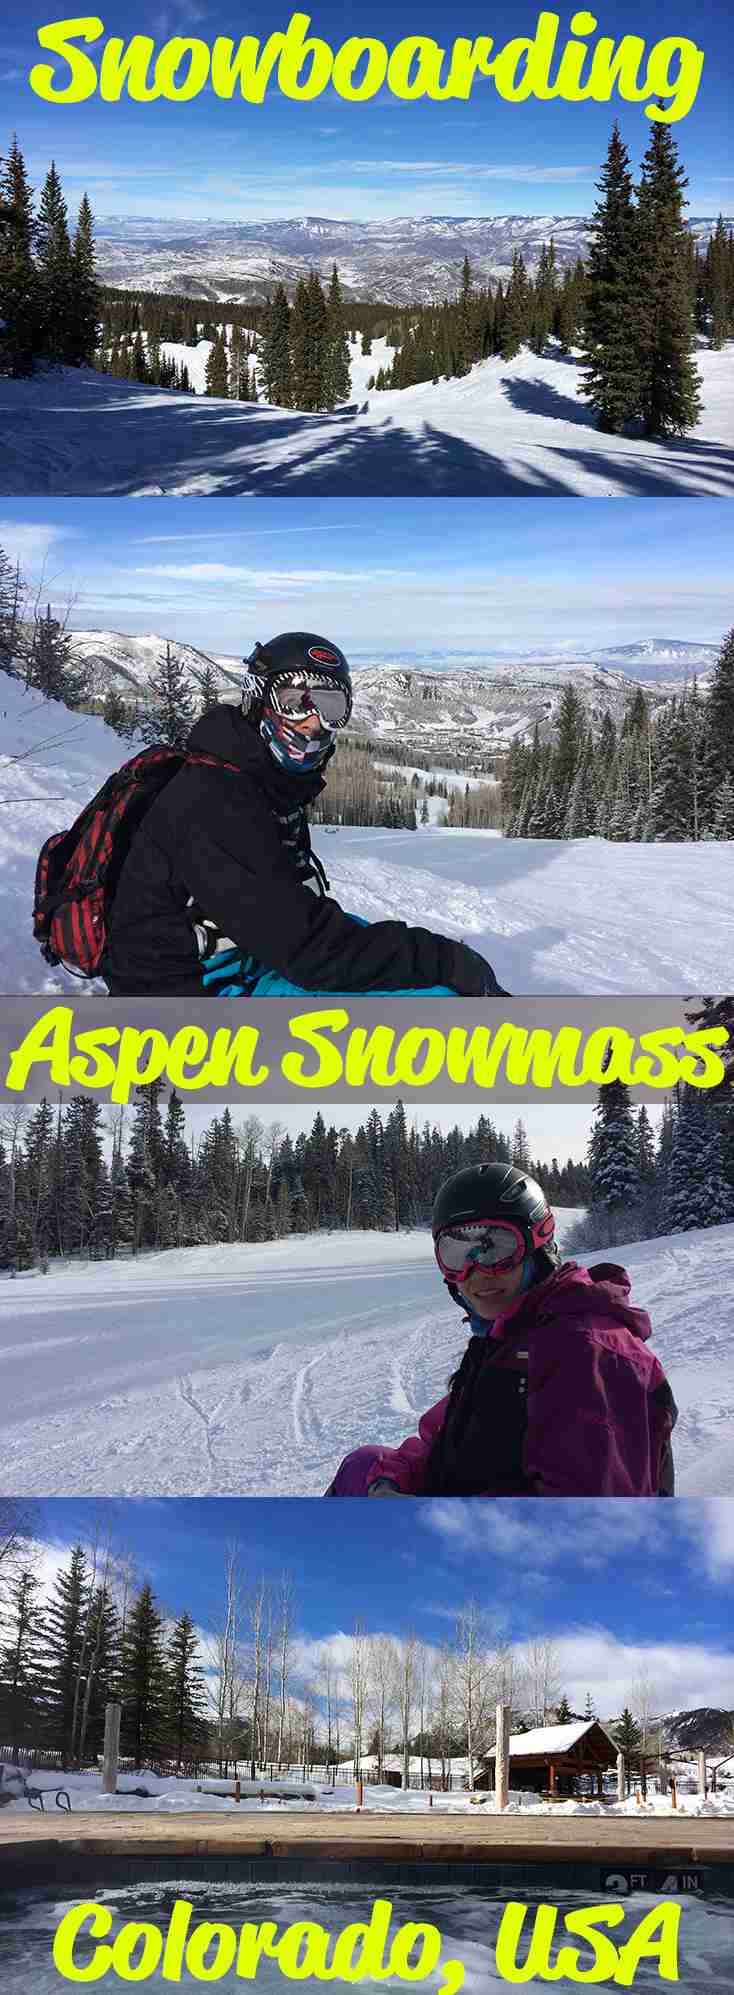 Snowboarding Snowmass, Aspen, Colorado – WhodoIdo: Snowmass is one of four mountains in Aspen and has 94 trails with the longest run being 5.3 miles! Perfect for intermediate and advanced riders. For those who are adventurous, show off your tricks at the Snowmass Park. Need a break from snowboarding? Then have a go at snowmobiling!